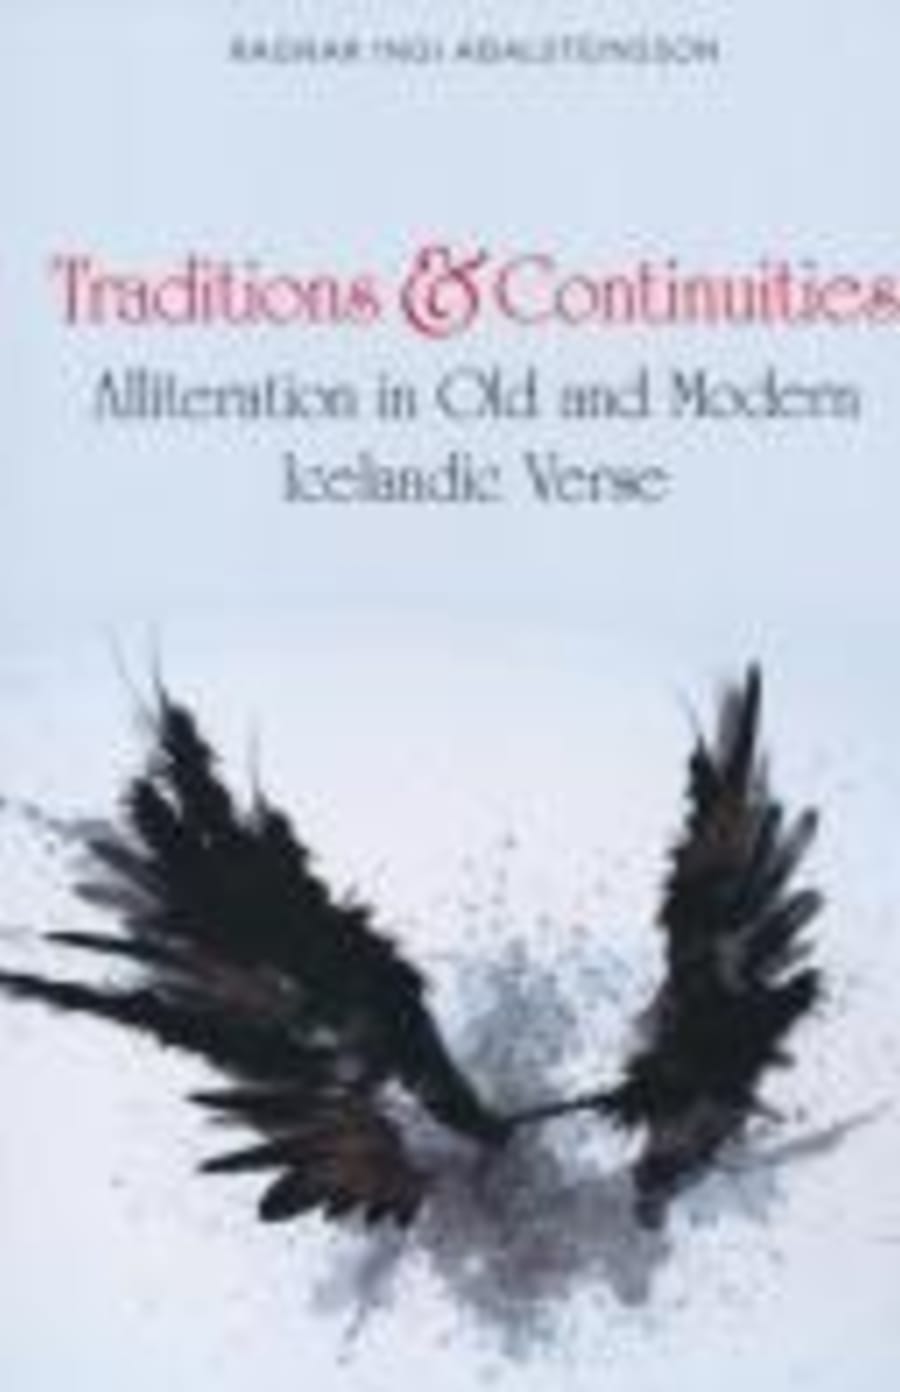 Traditions & Continuities